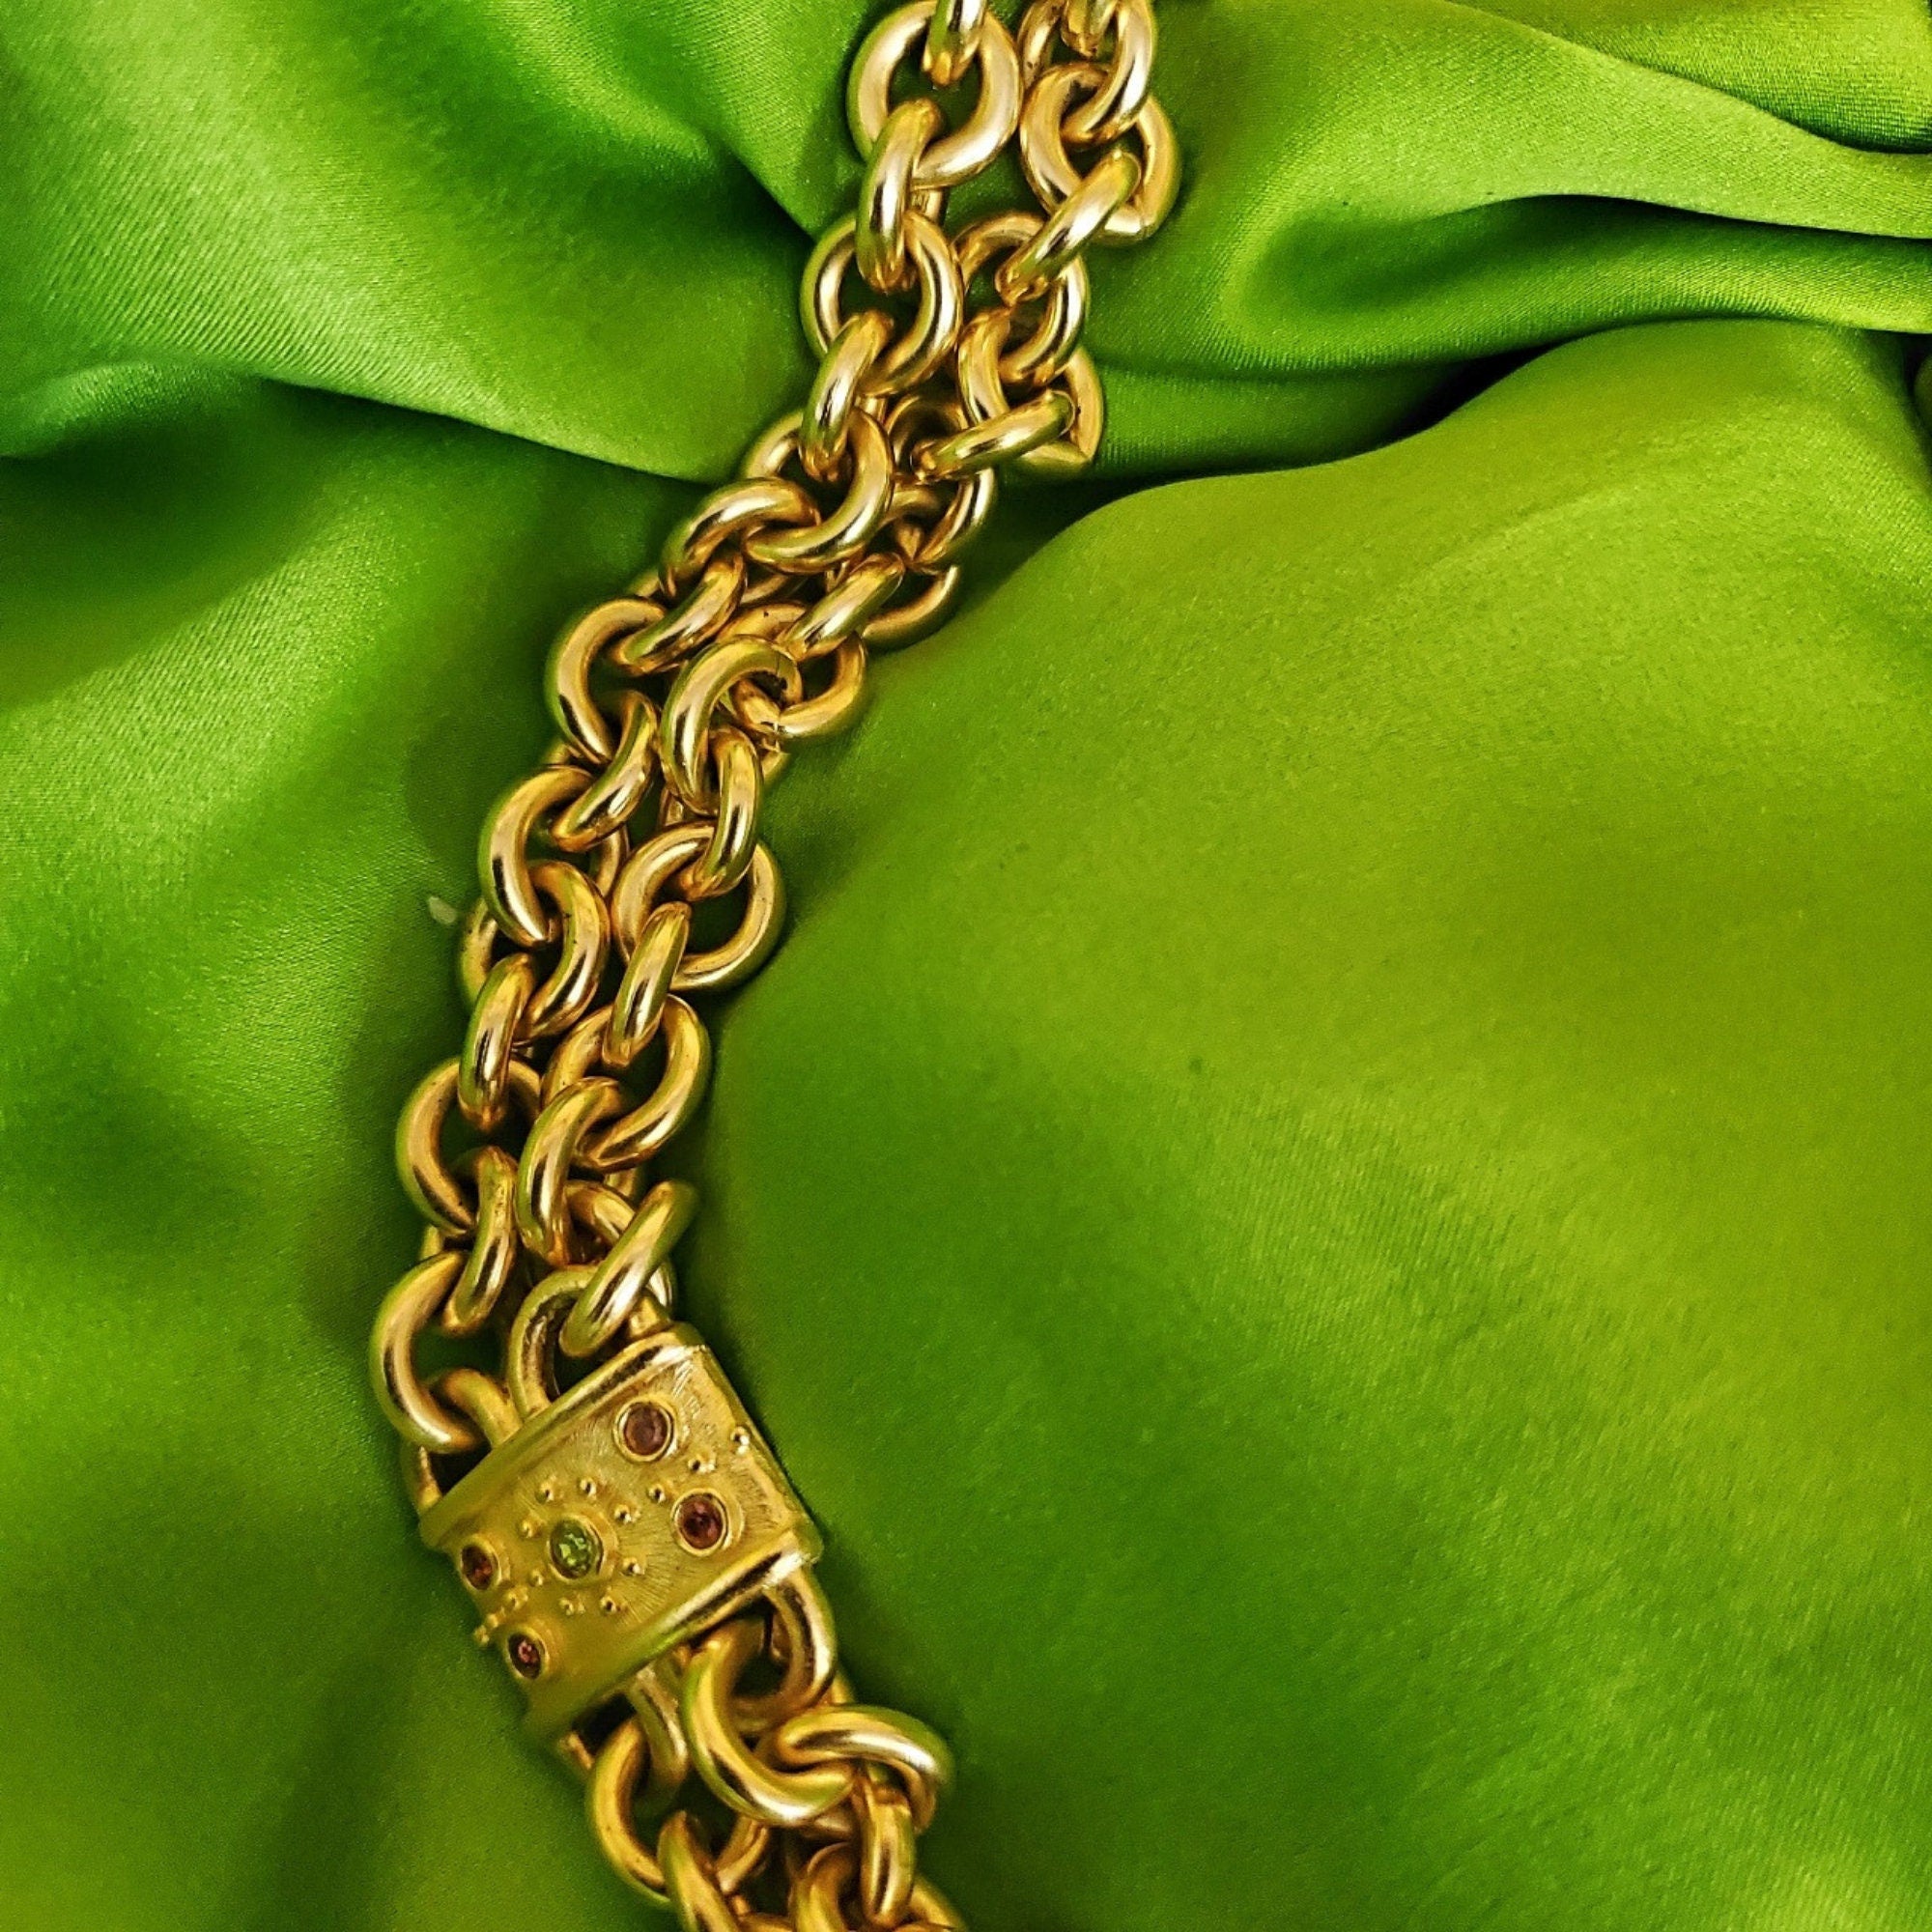 Gorgeous ROXANNE ASSOULIN Station Link Chain Glass Cabochon Crystal Gold Plated Vintage Signed Statement Runway Couture